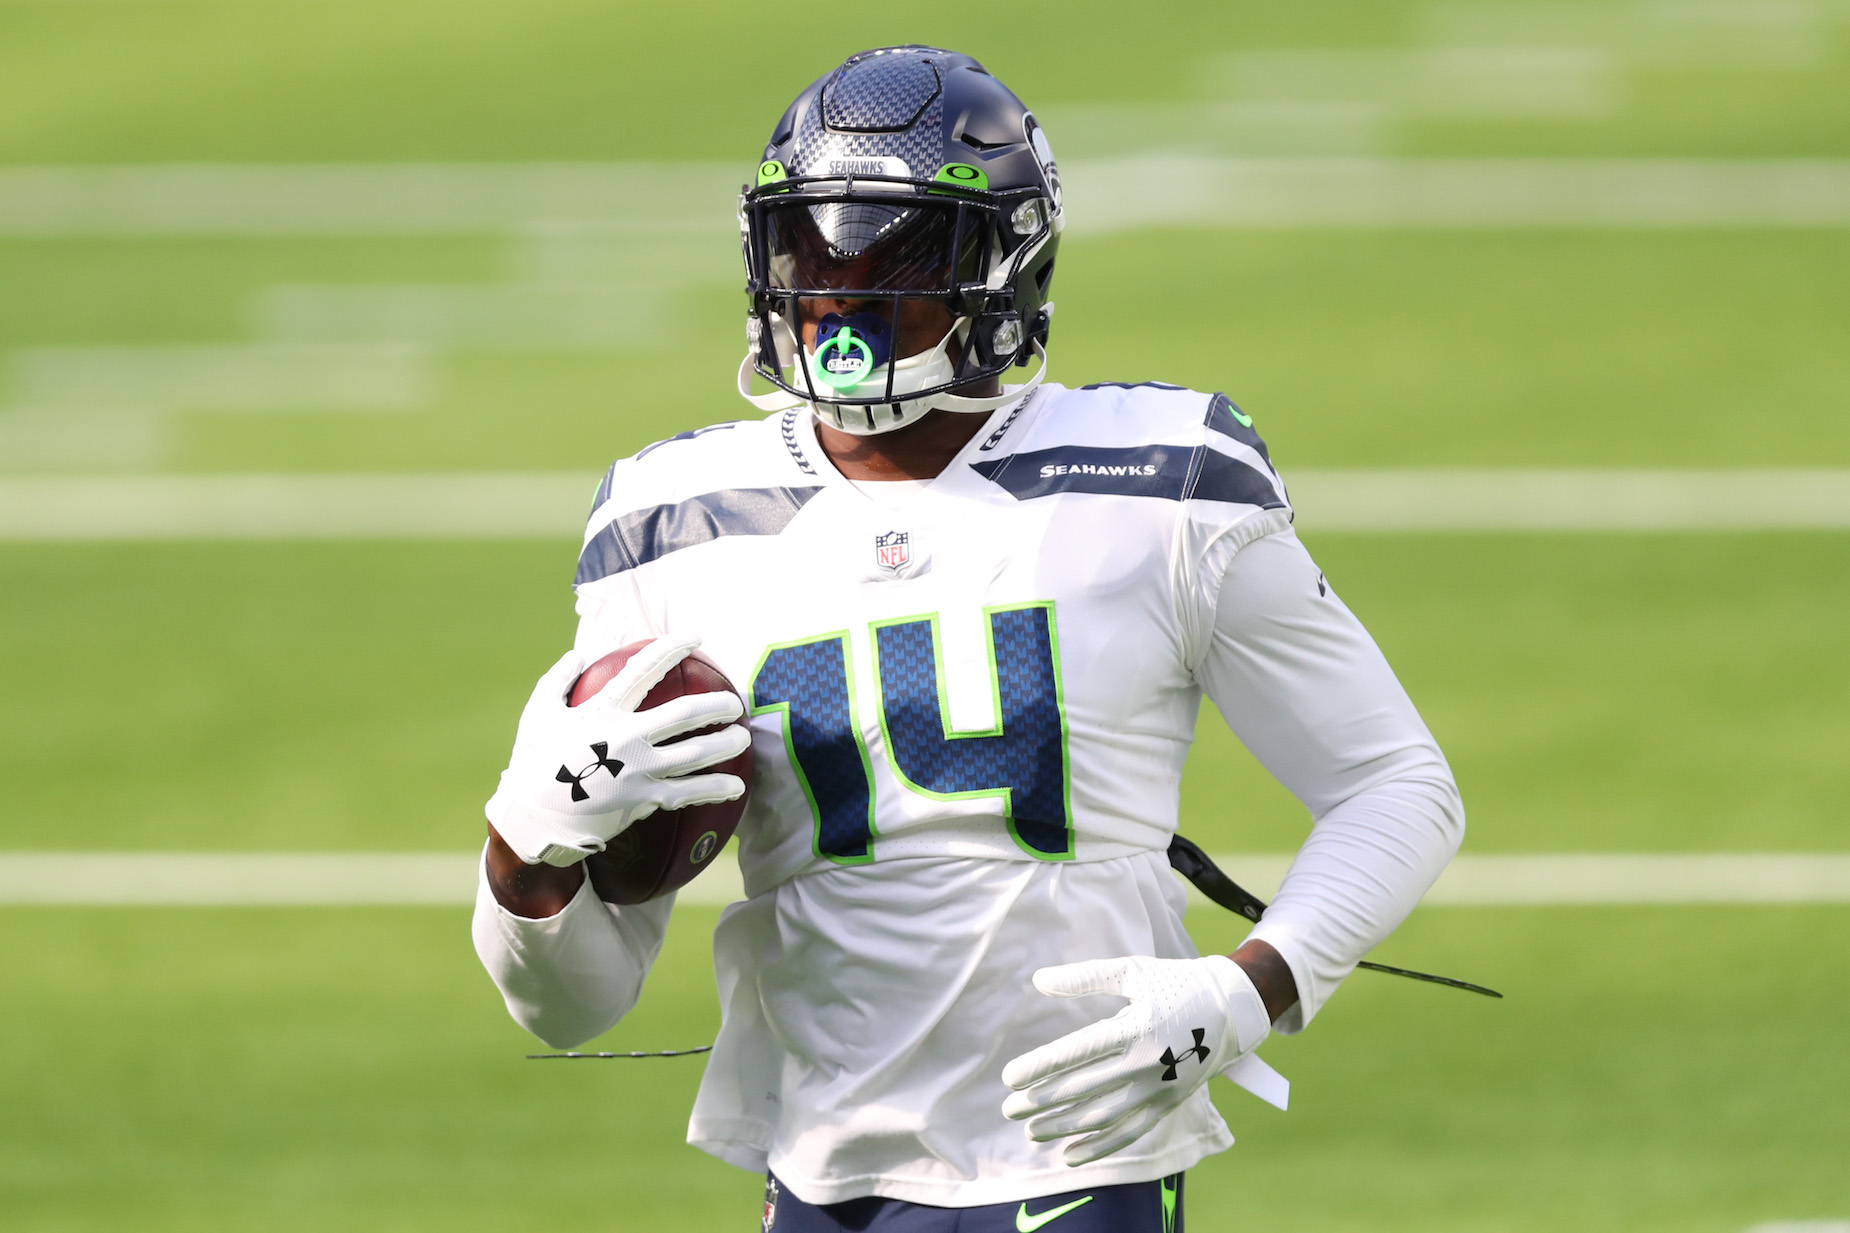 Seattle Seahawks receiver DK Metcalf has a pacifier mouthguard, which tells you everything you need to know about his attitude.